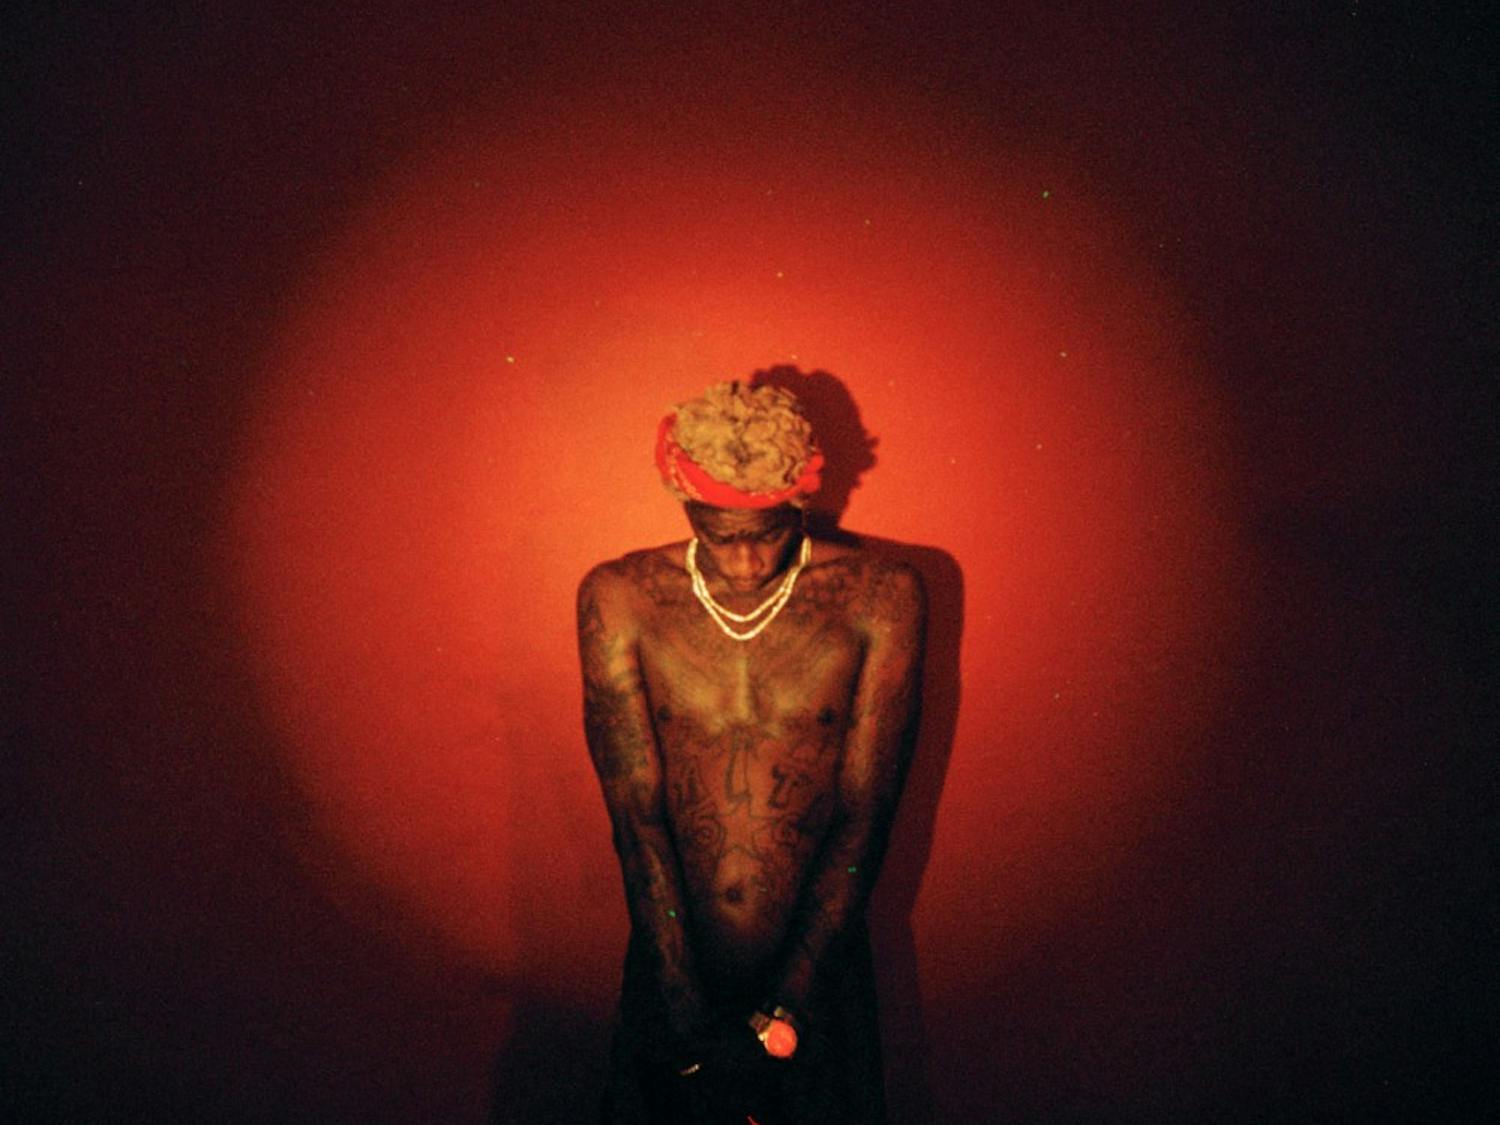 On his newest project Barter 6, Young Thug continues to rely on the elements of his music that made him popular - overarching, catchy melodies and hooks - at the expense of his album’s overall lyricism.